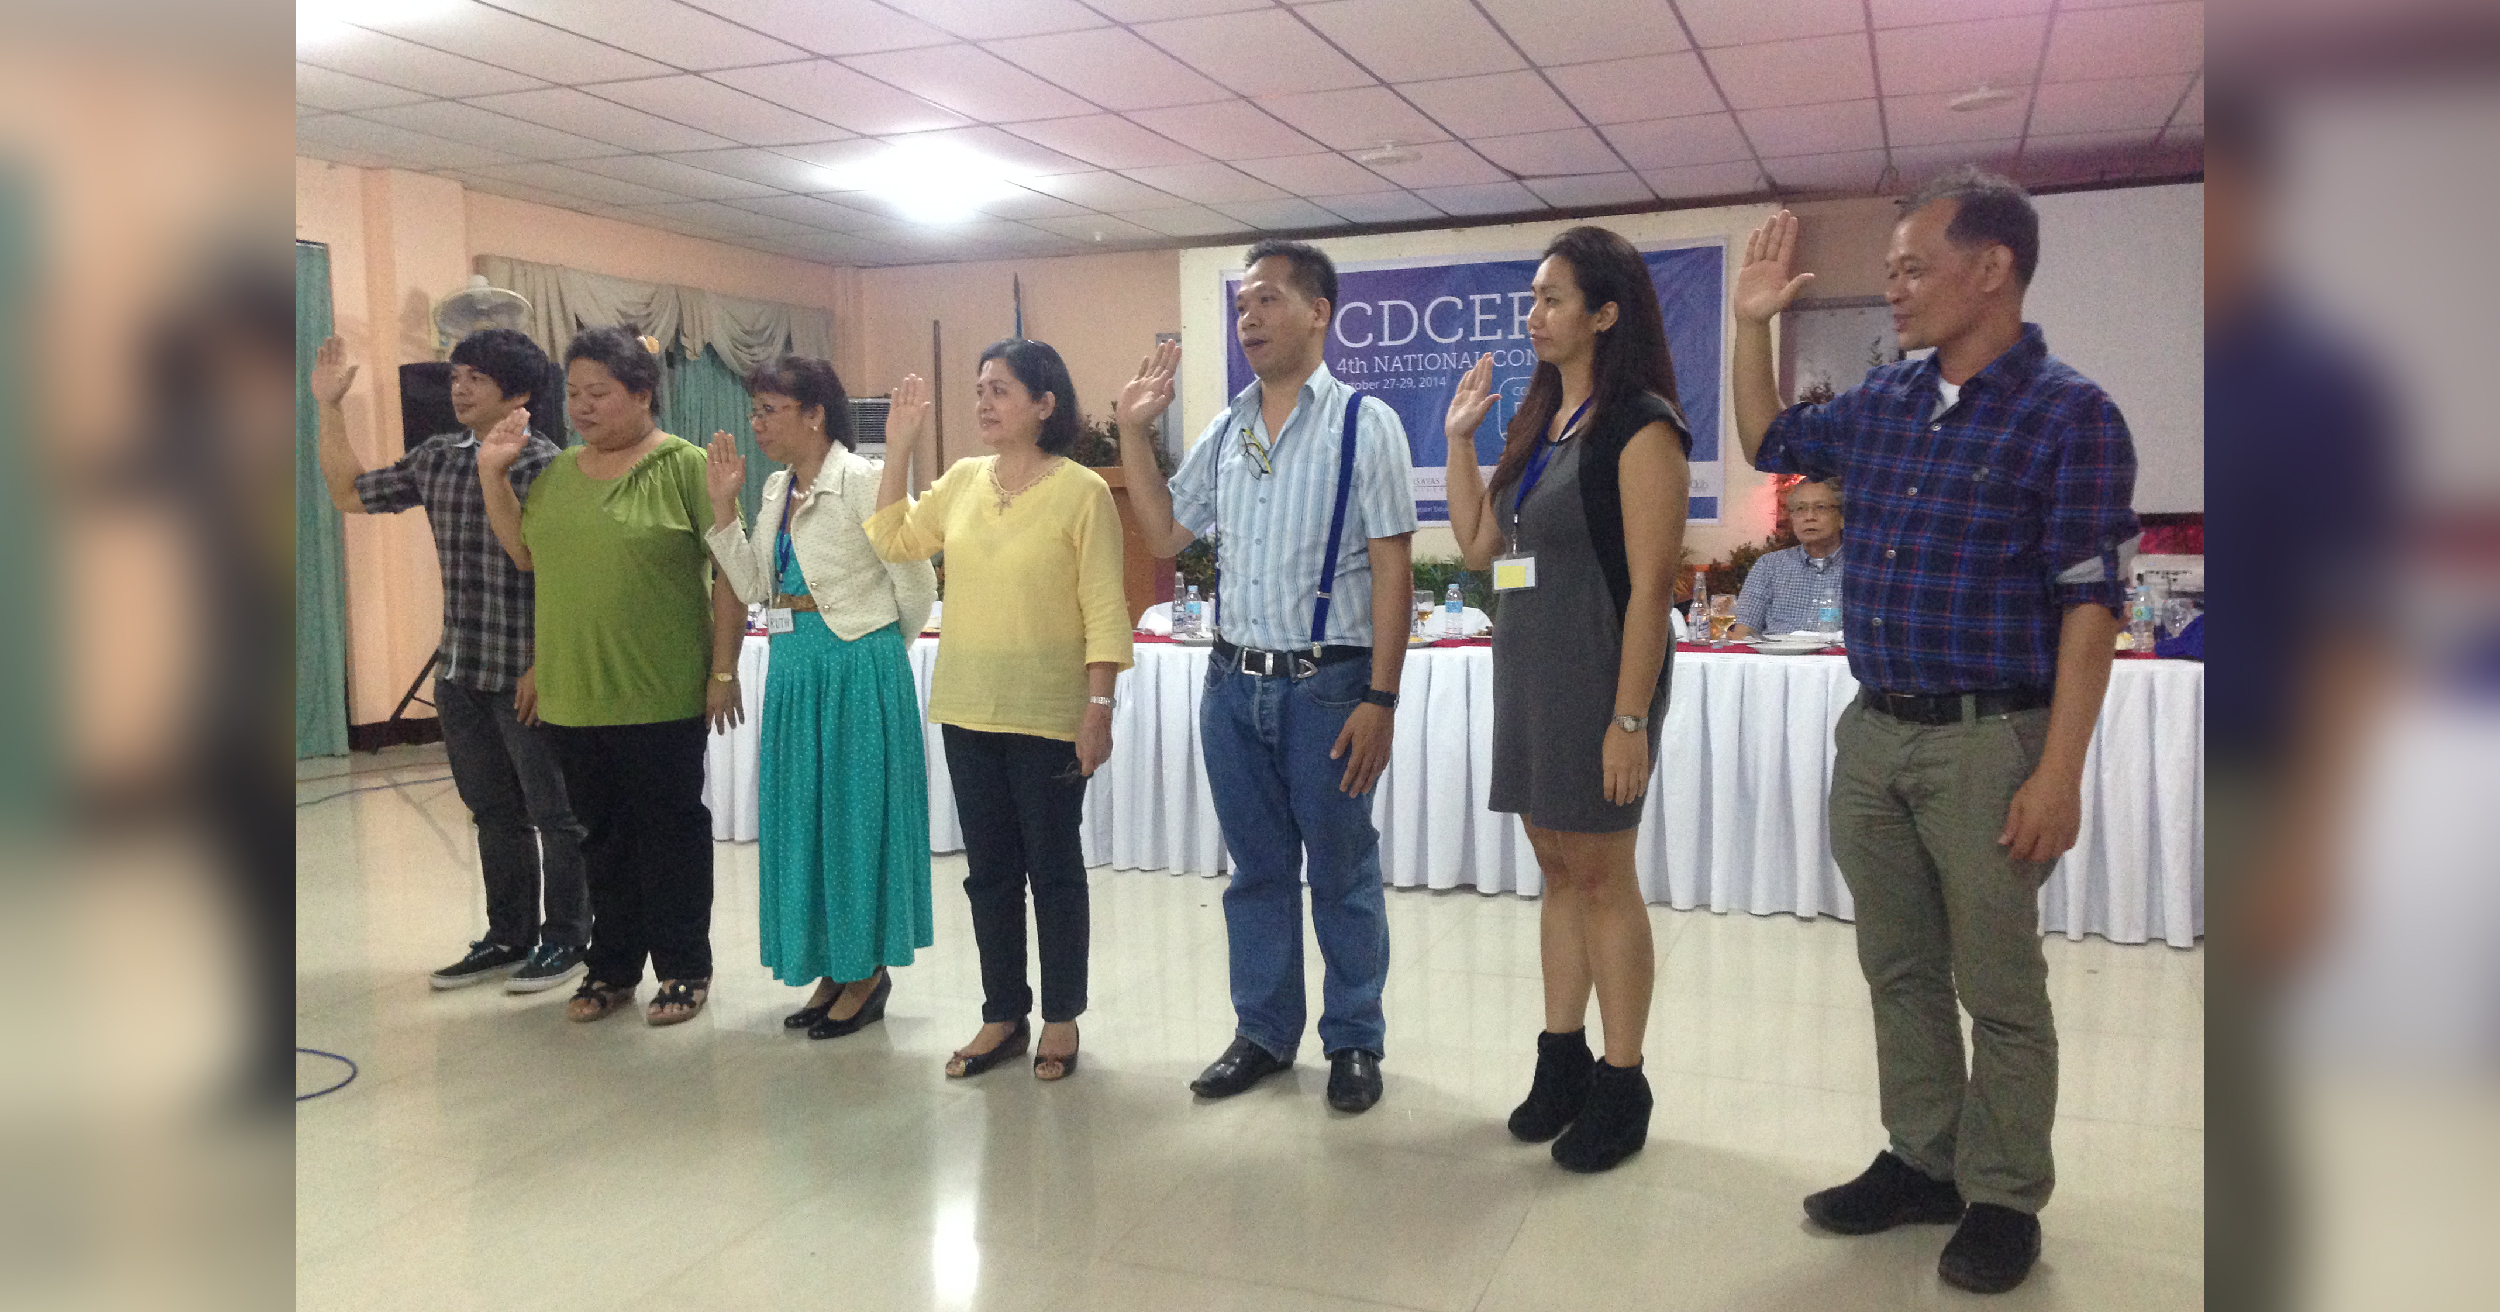 NEW OFFICERS. The new set of officers of the Consortium of Dev’t Comm. Educators & Practitioners in the Philippines take their oath. DDC’s Dr. Rotacio Gravoso (rightmost) and Dr. Christina Gabrillo (second from left) are elected president and secretary, respectively. Photo by Jed Cortes.